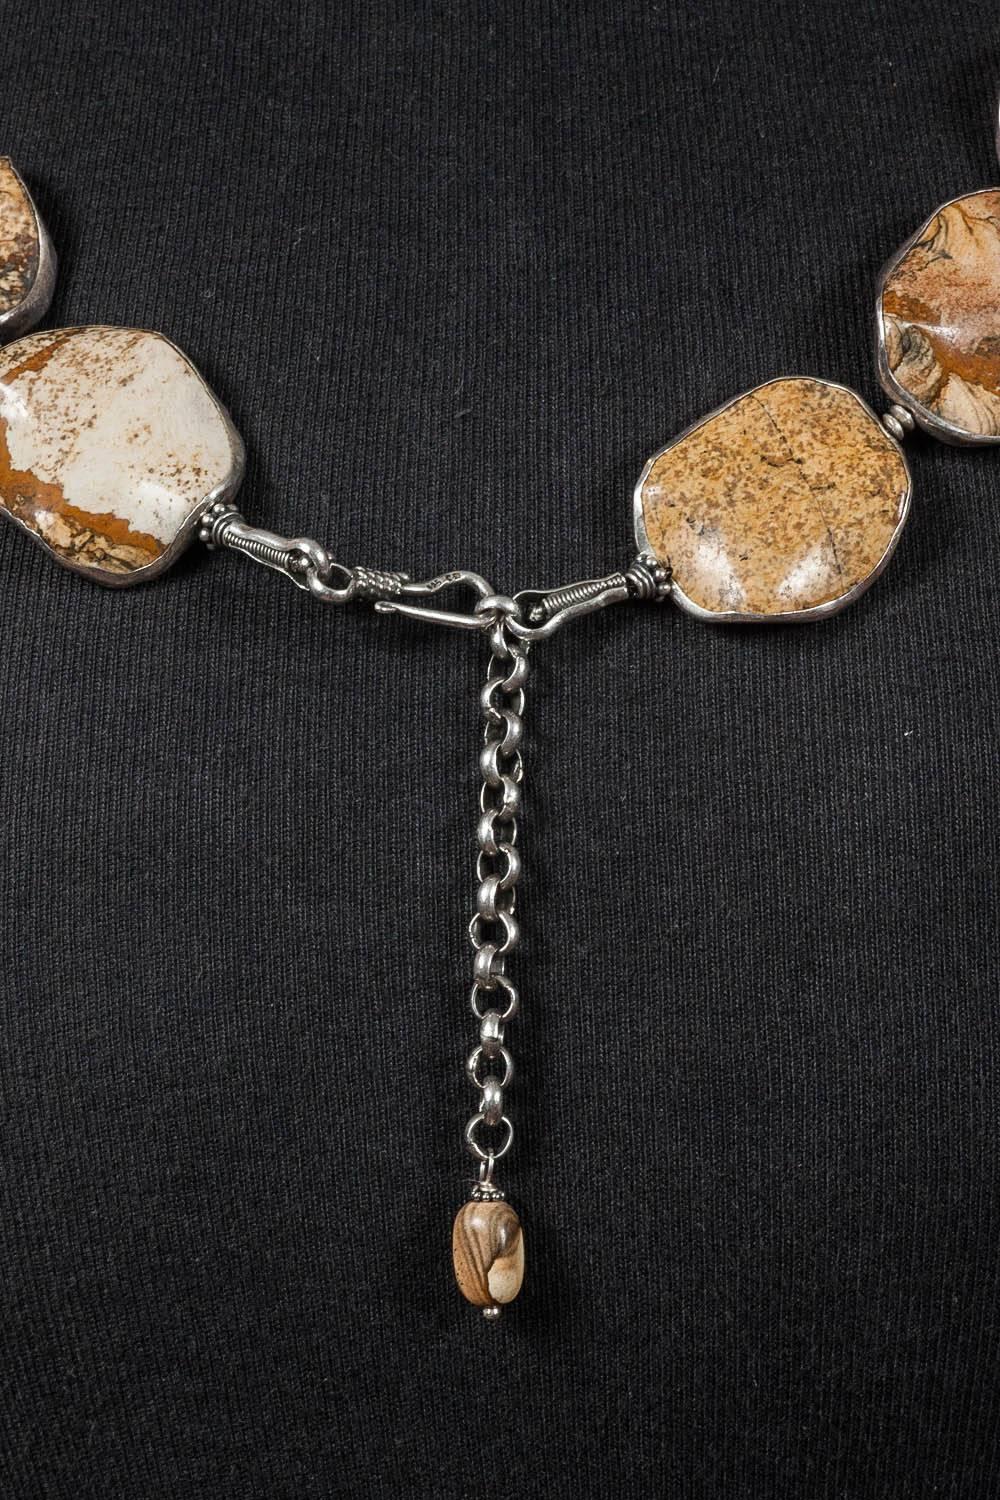 Women's or Men's Highly unusual agate and silver necklace or belt, 1970s .